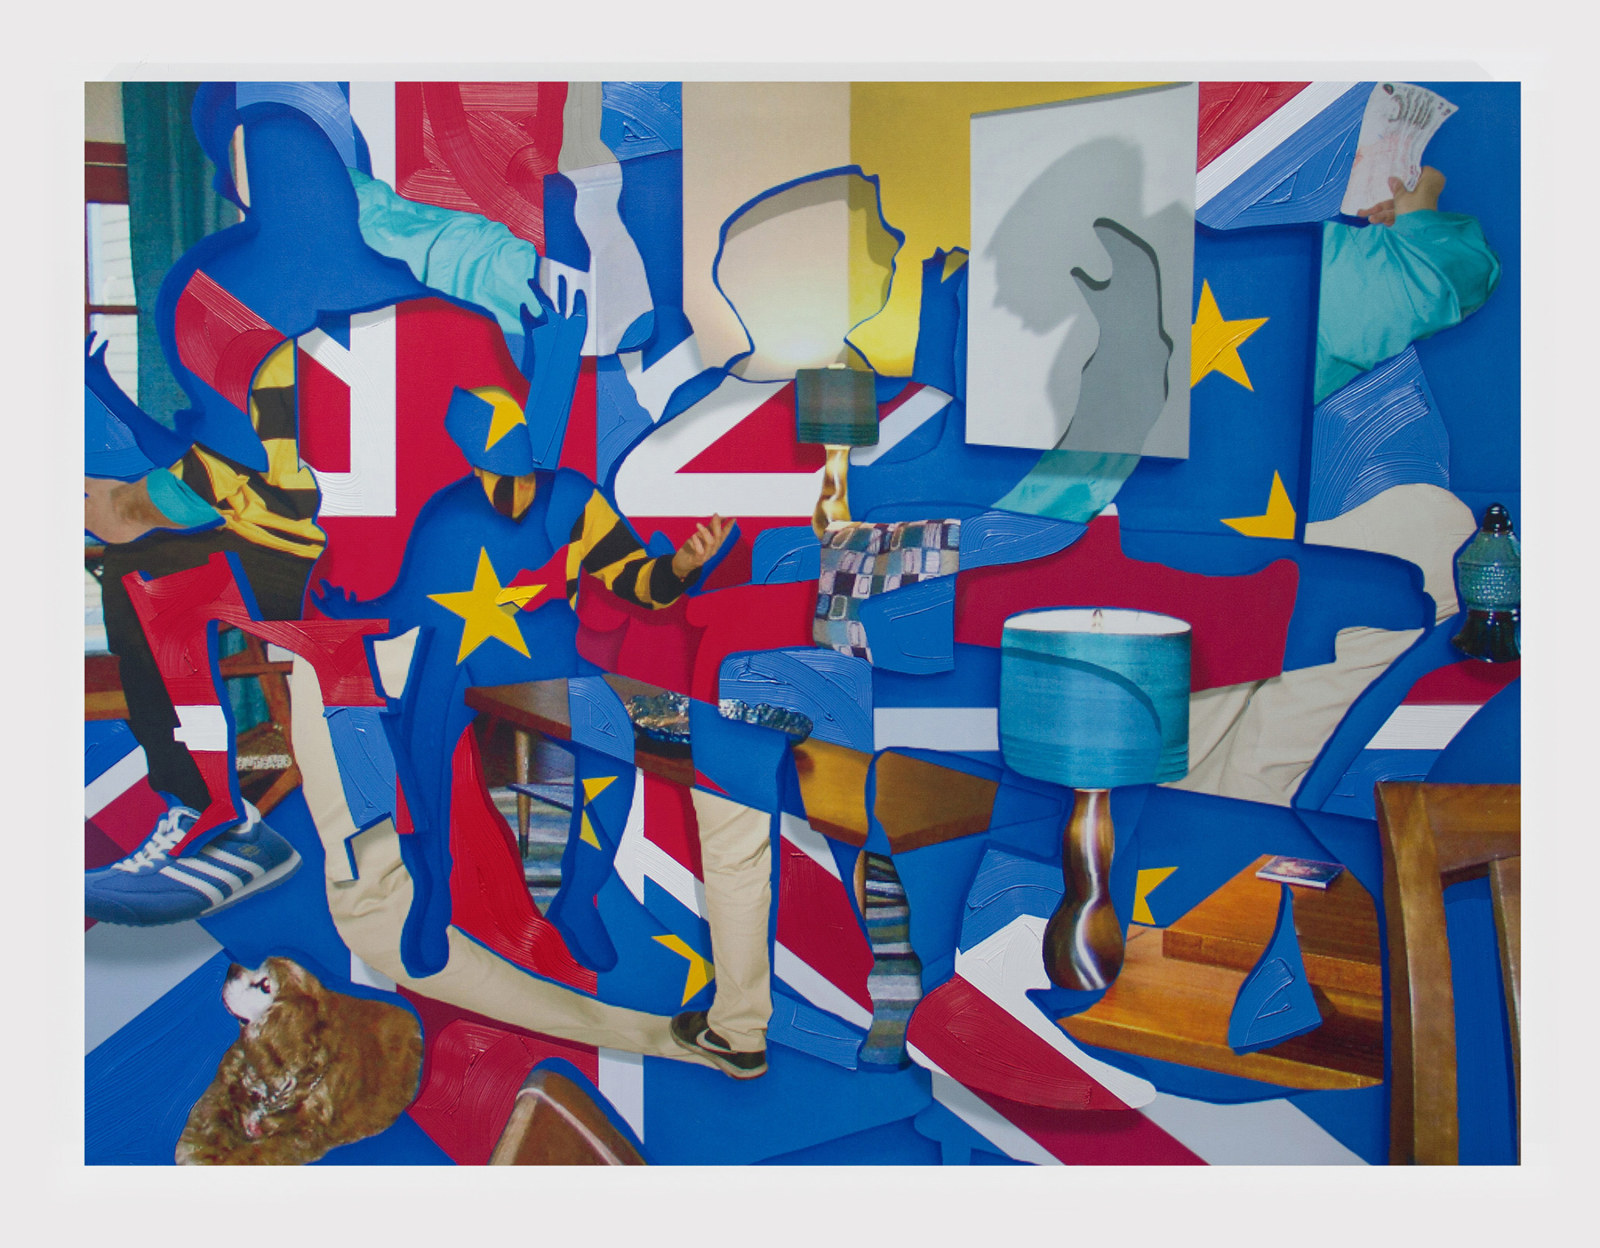 Pieter Schoolwerth, Leave/Remain #3